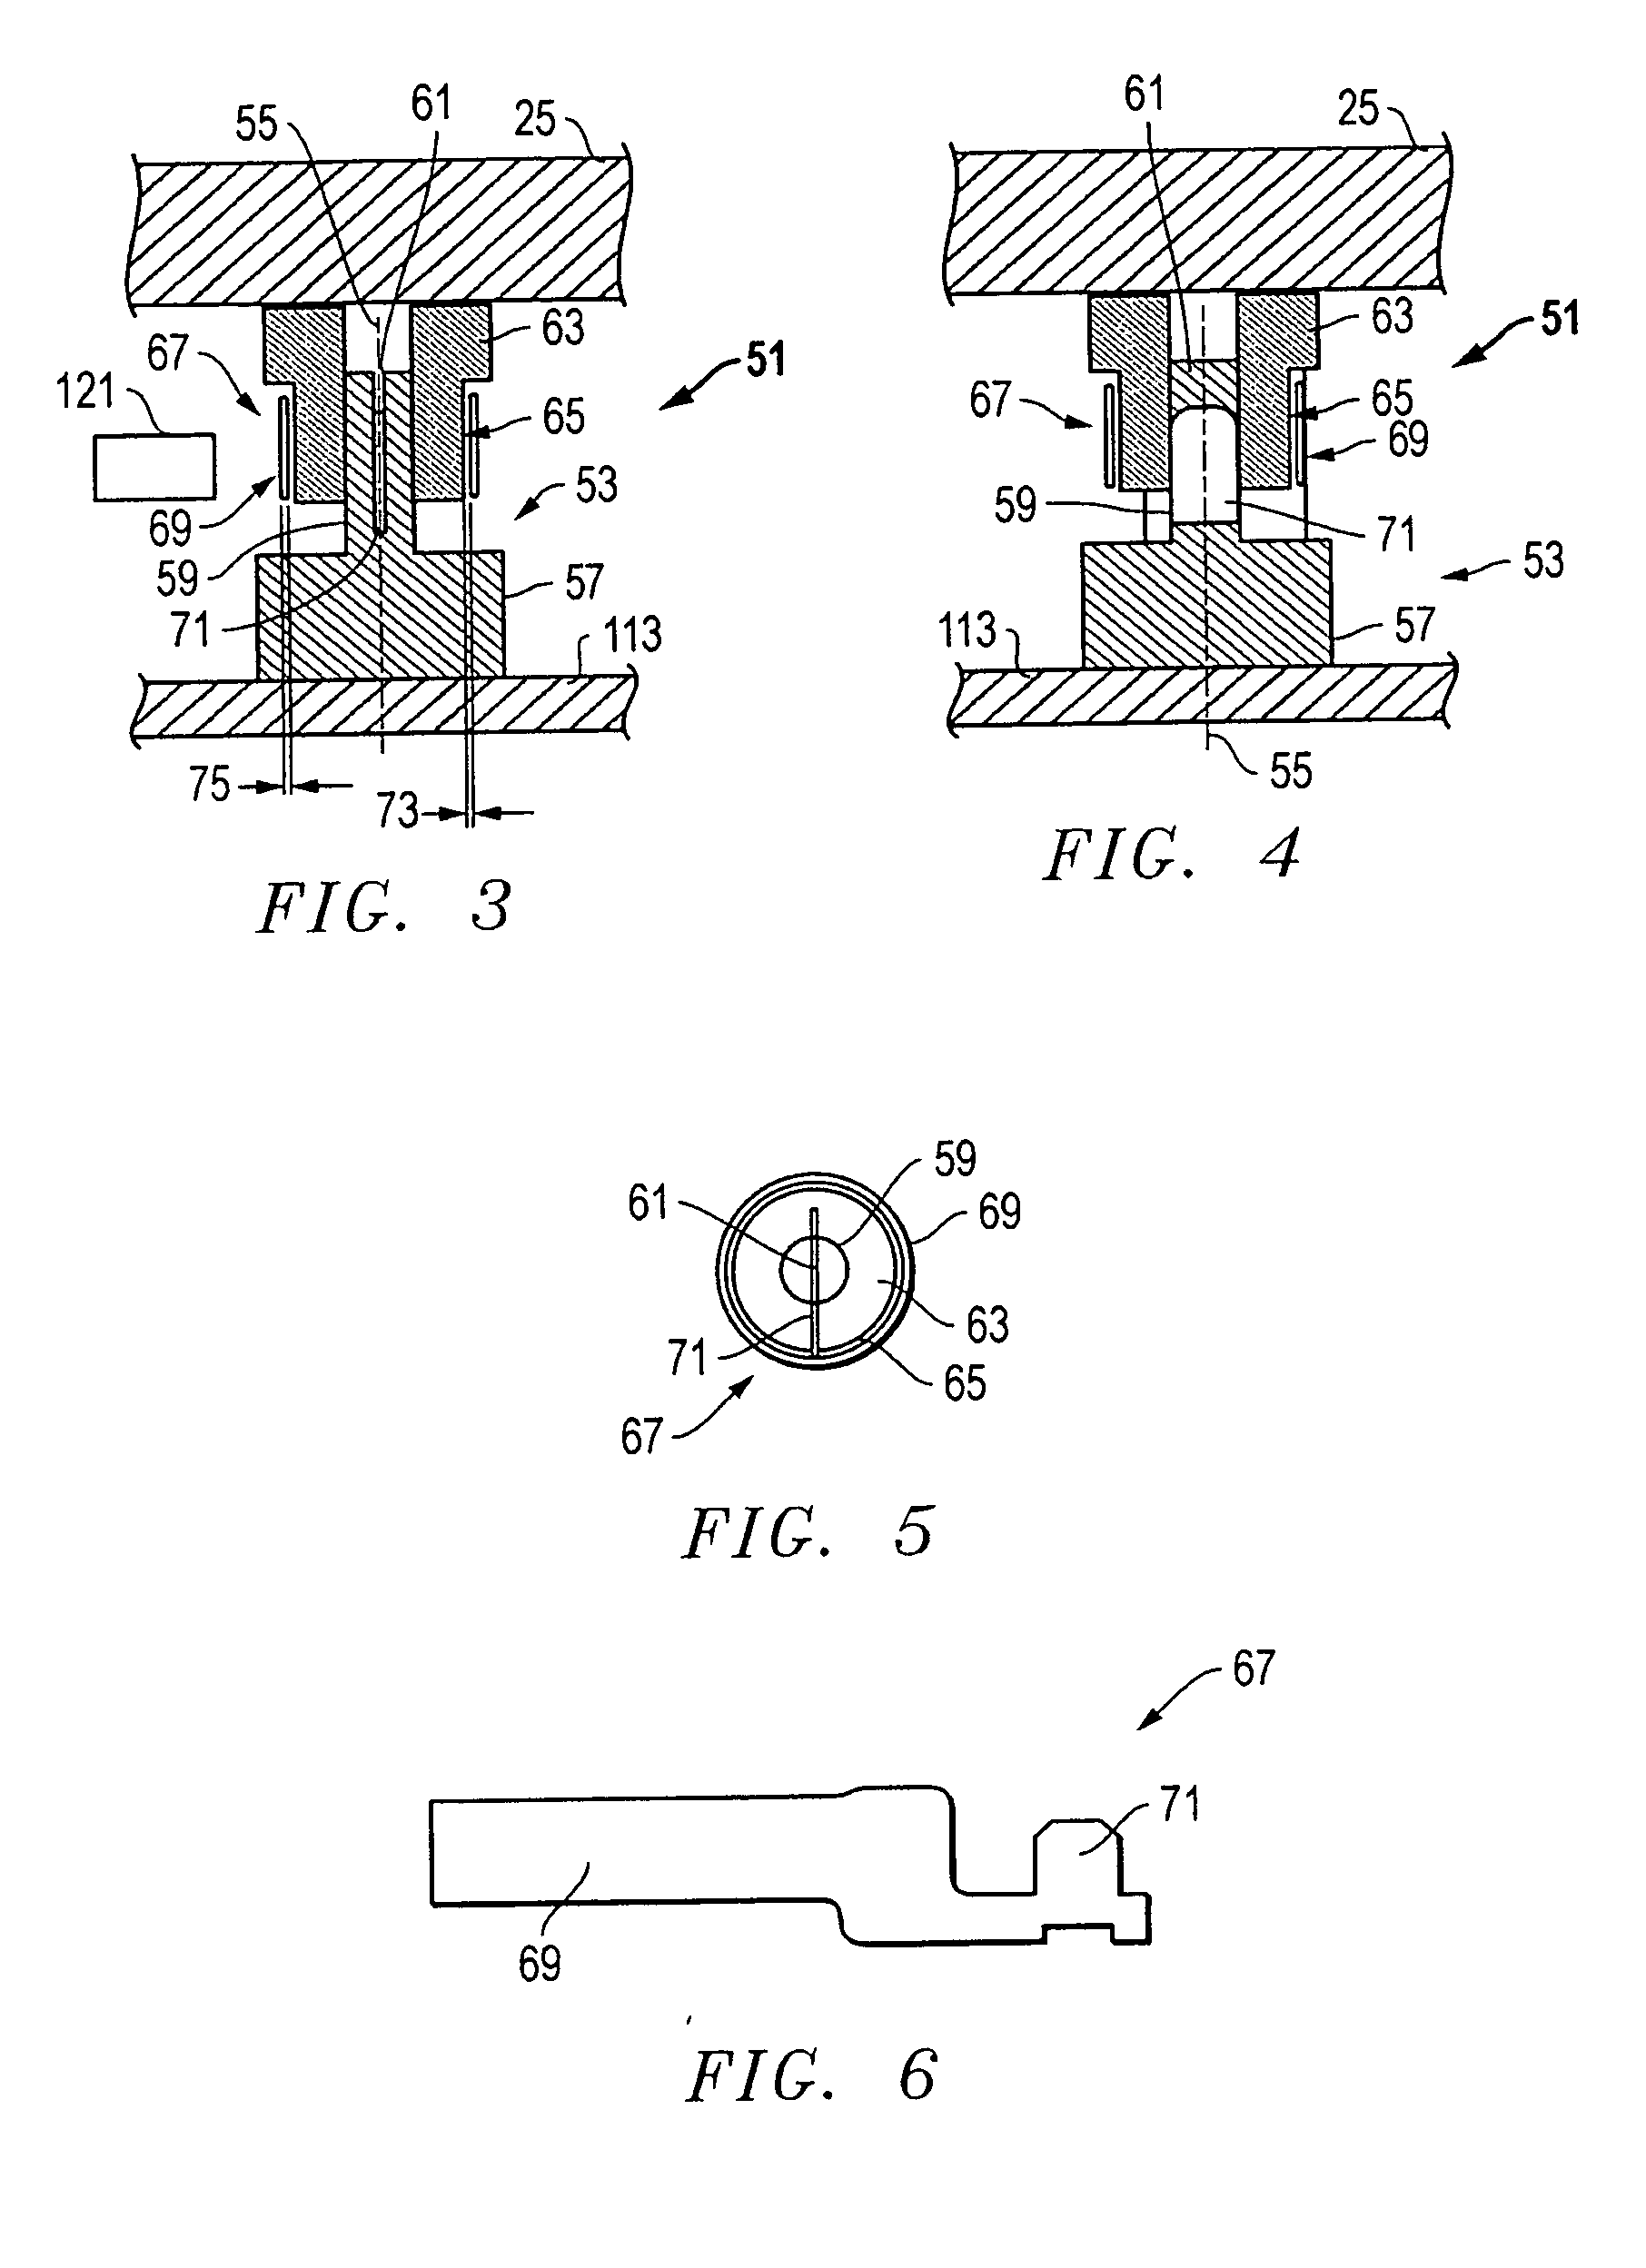 Bilinear-nonlinear limit stop for hard disk drive actuator